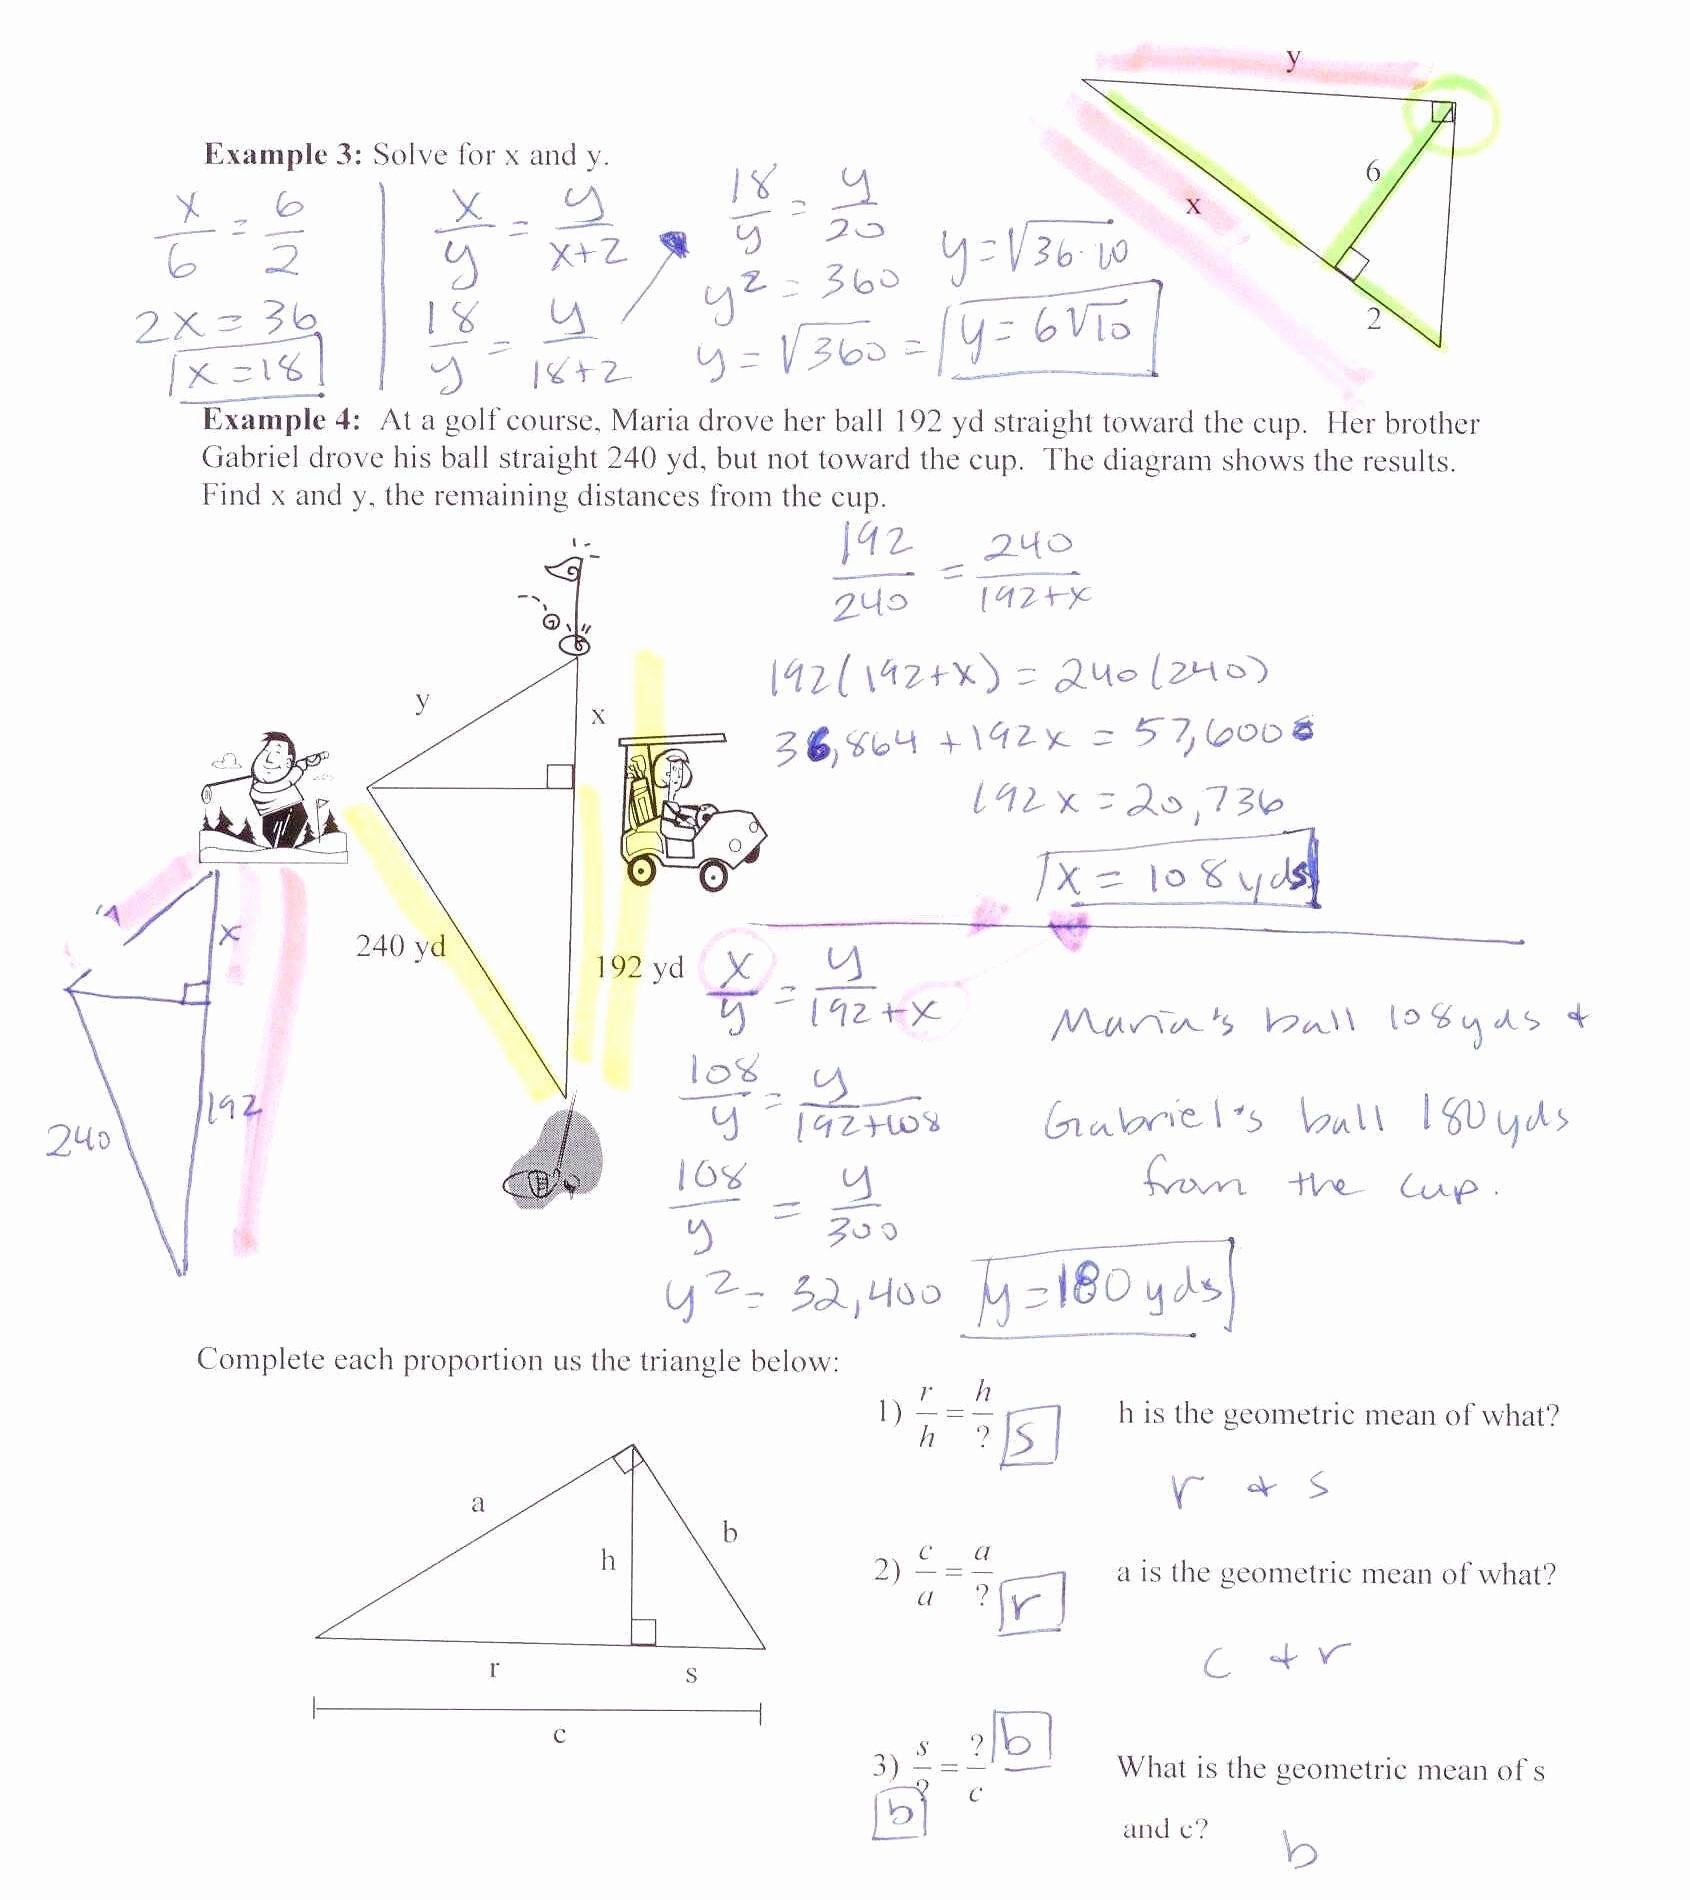 Congruent Triangles Worksheet Answers Fresh Geometry Worksheet Congruent Triangles Sss and Sas Answers